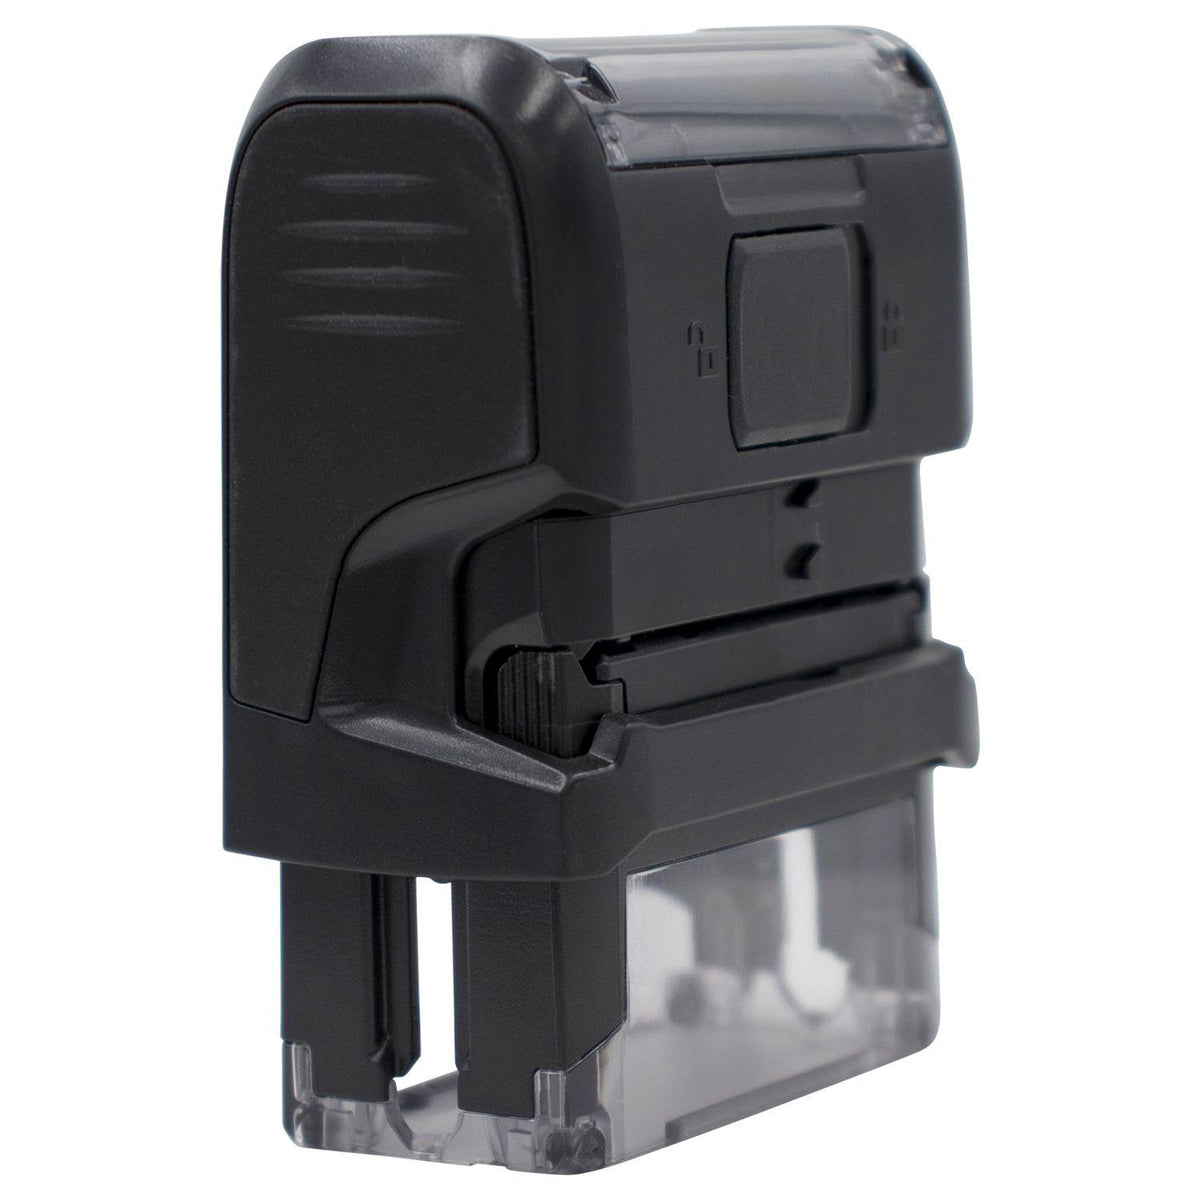 Self-Inking Bold Draft Stamp - Engineer Seal Stamps - Brand_Trodat, Impression Size_Small, Stamp Type_Self-Inking Stamp, Type of Use_General, Type of Use_Office